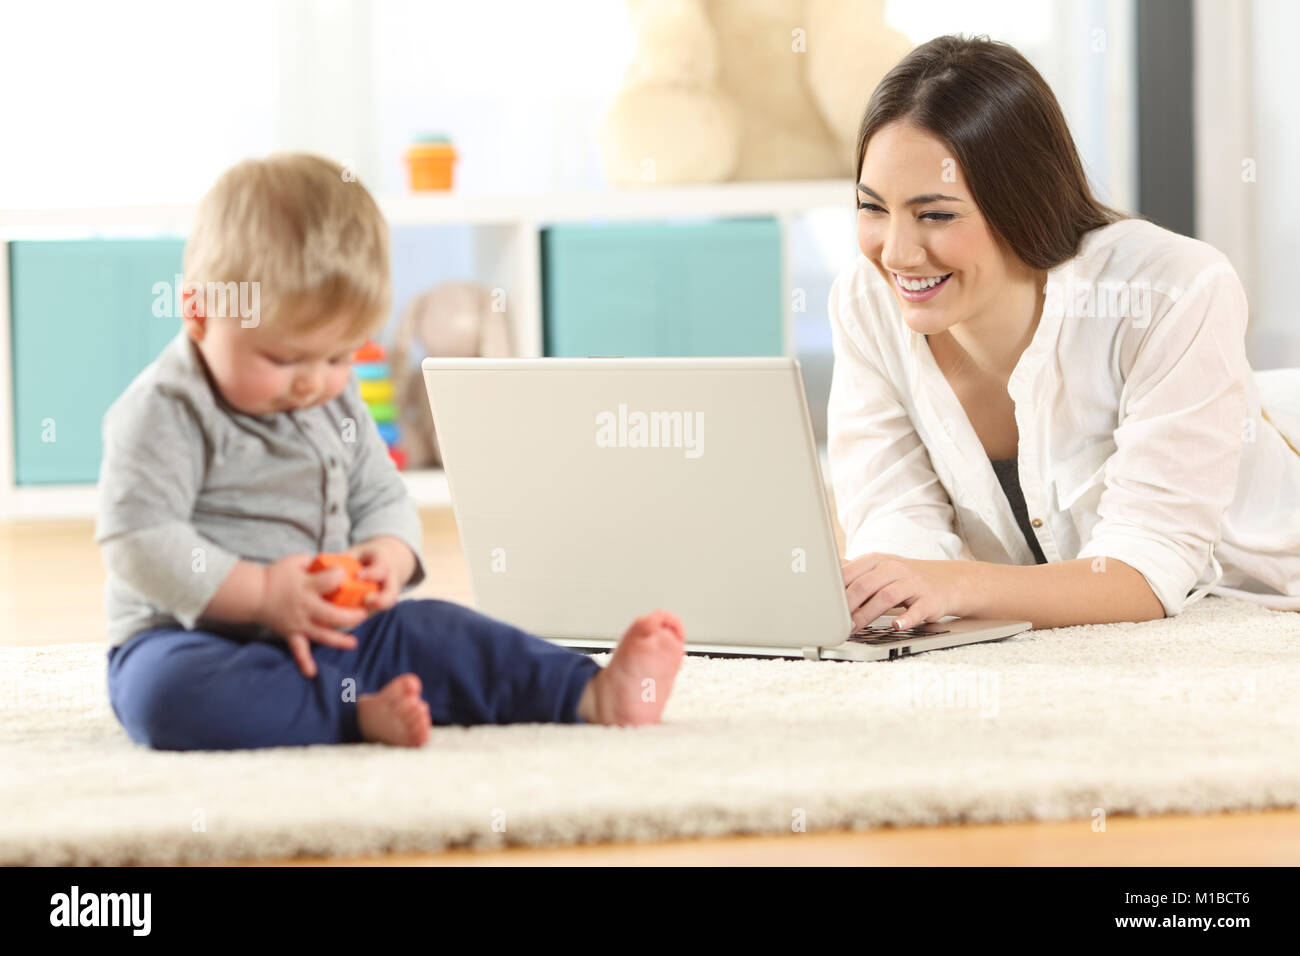 Mother working with a laptop and baby playing with toys on the floor at home Stock Photo